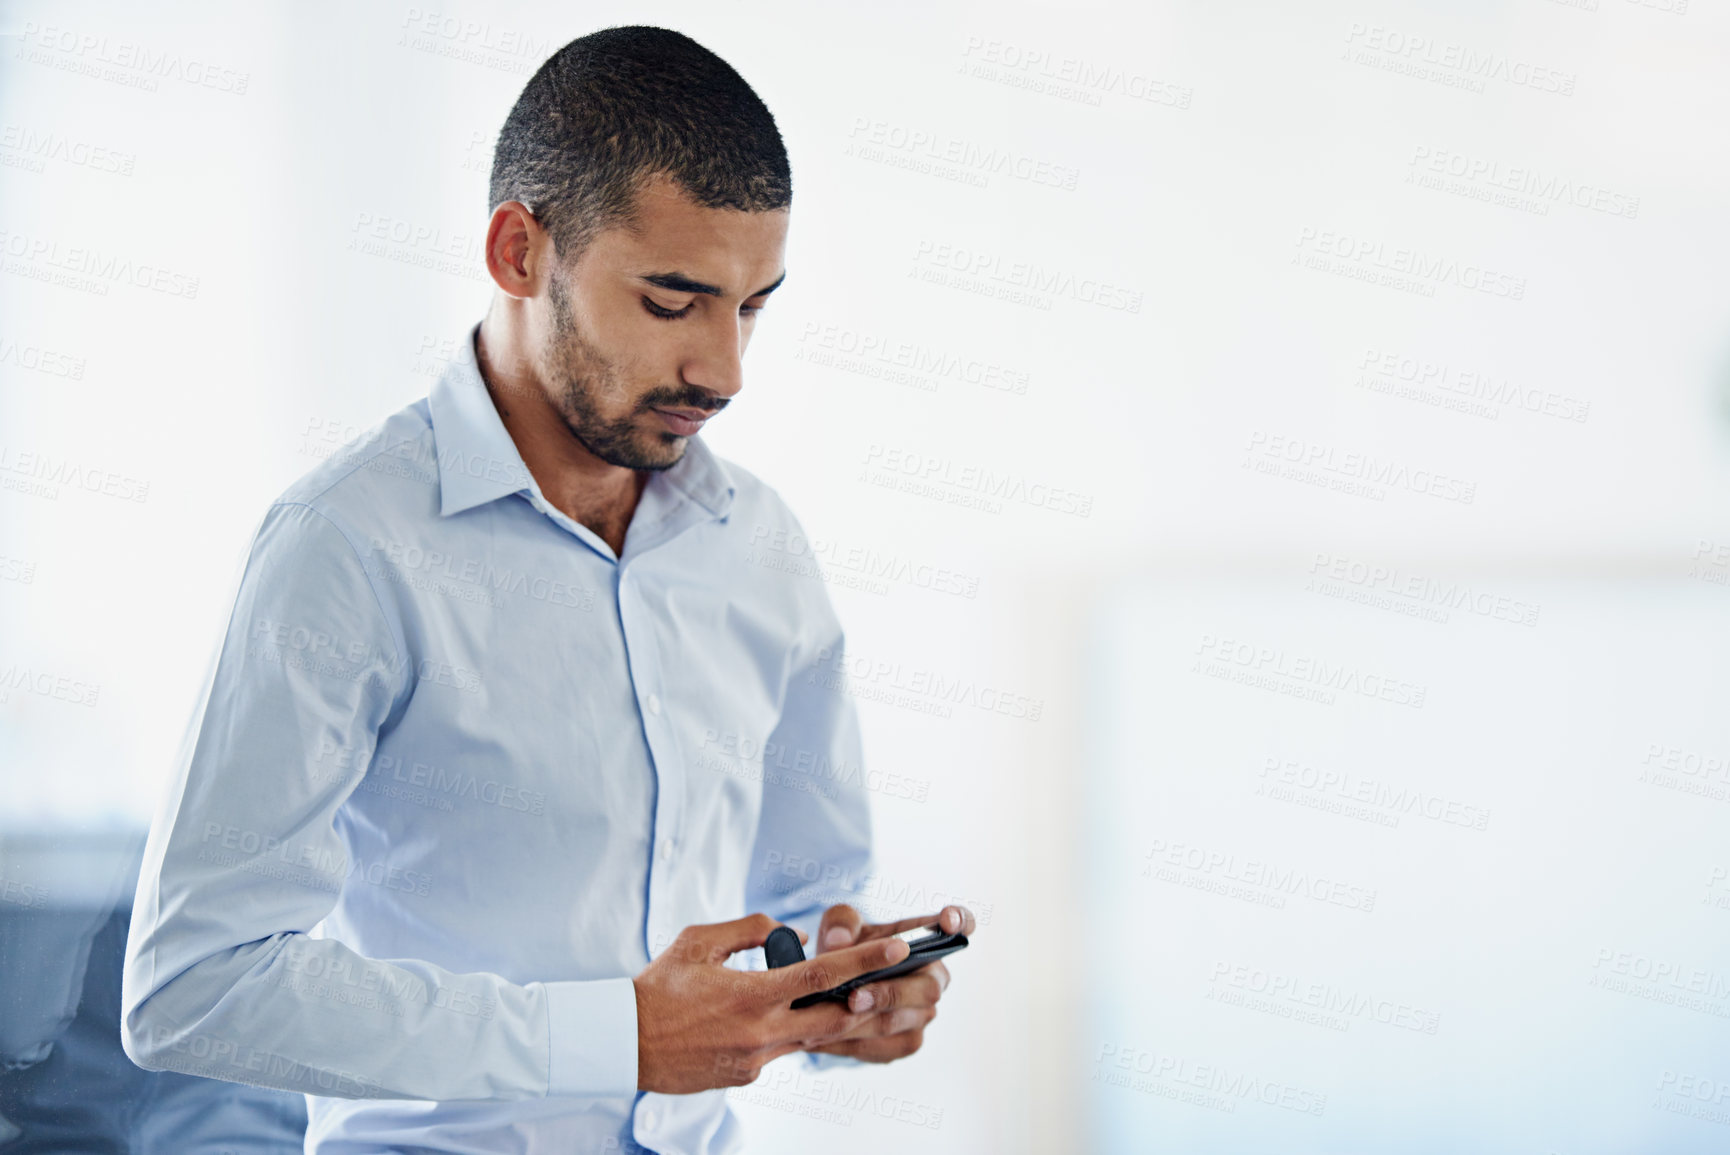 Buy stock photo Shot of a young businessman sending a text message while standing in an office